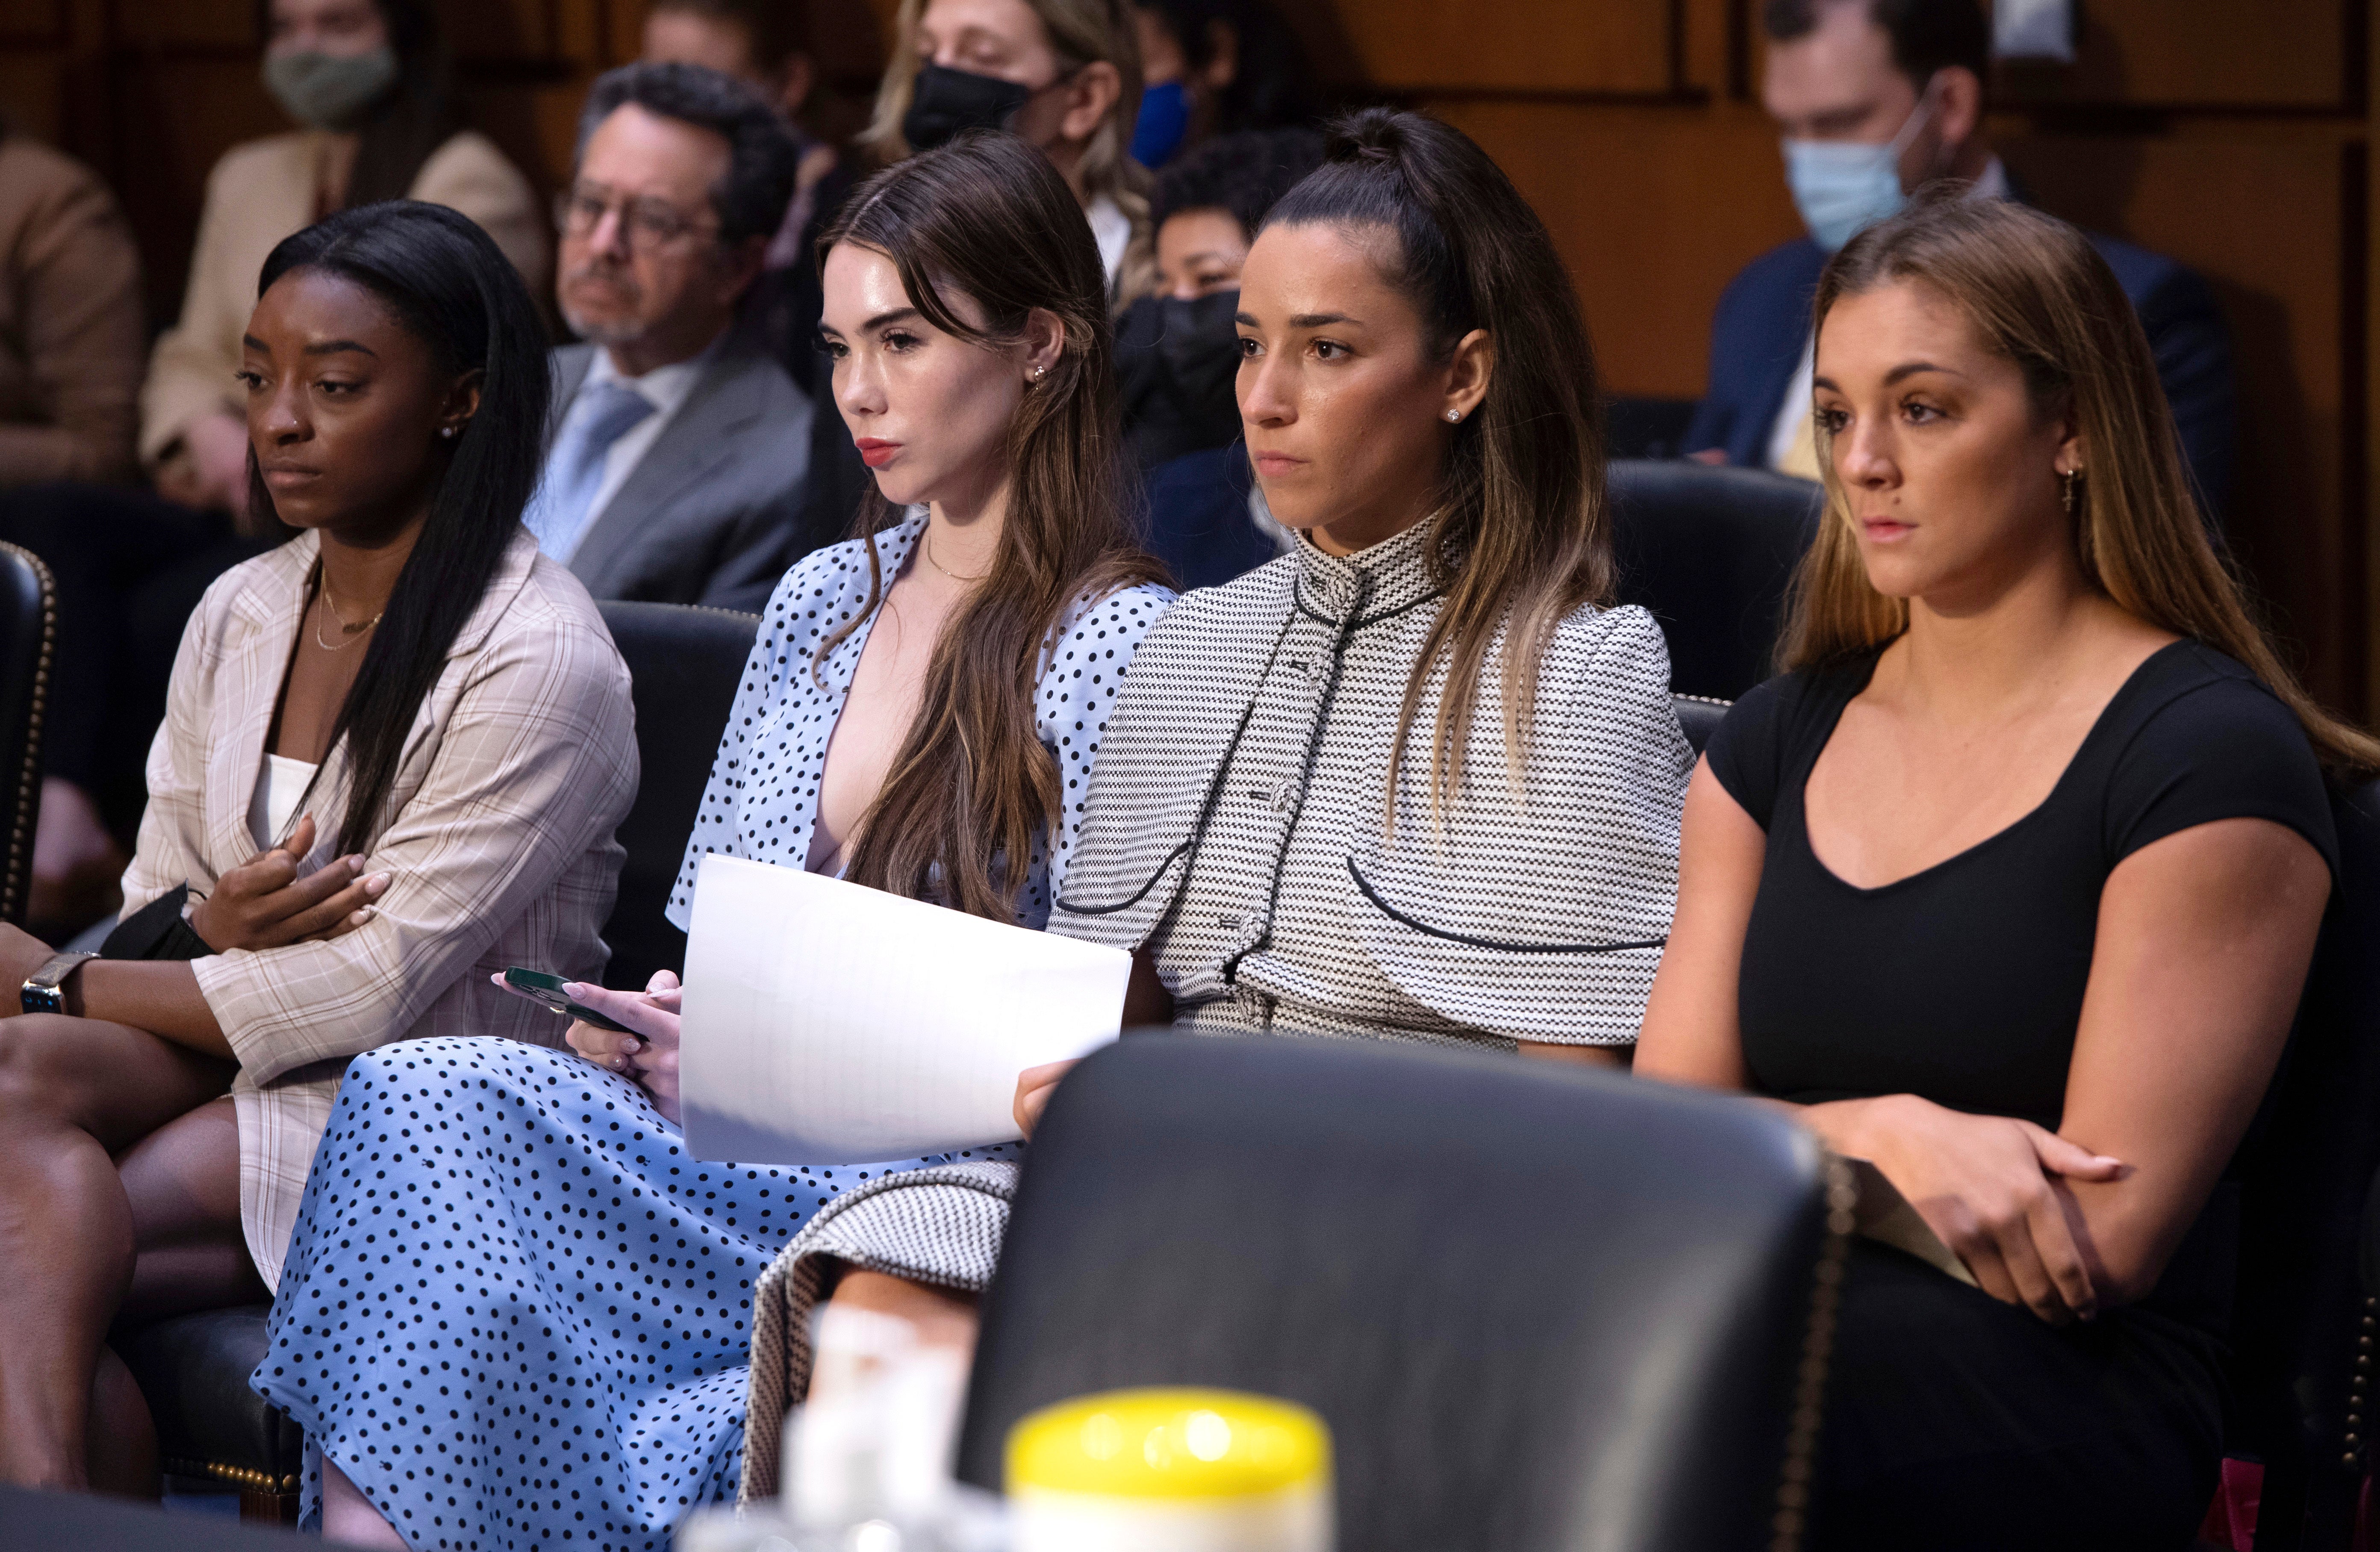 US gymnasts from left, Simone Biles, McKayla Maroney, Aly Raisman and Maggie Nichols, arrive to testify about abuse they suffered at hands of Nassar